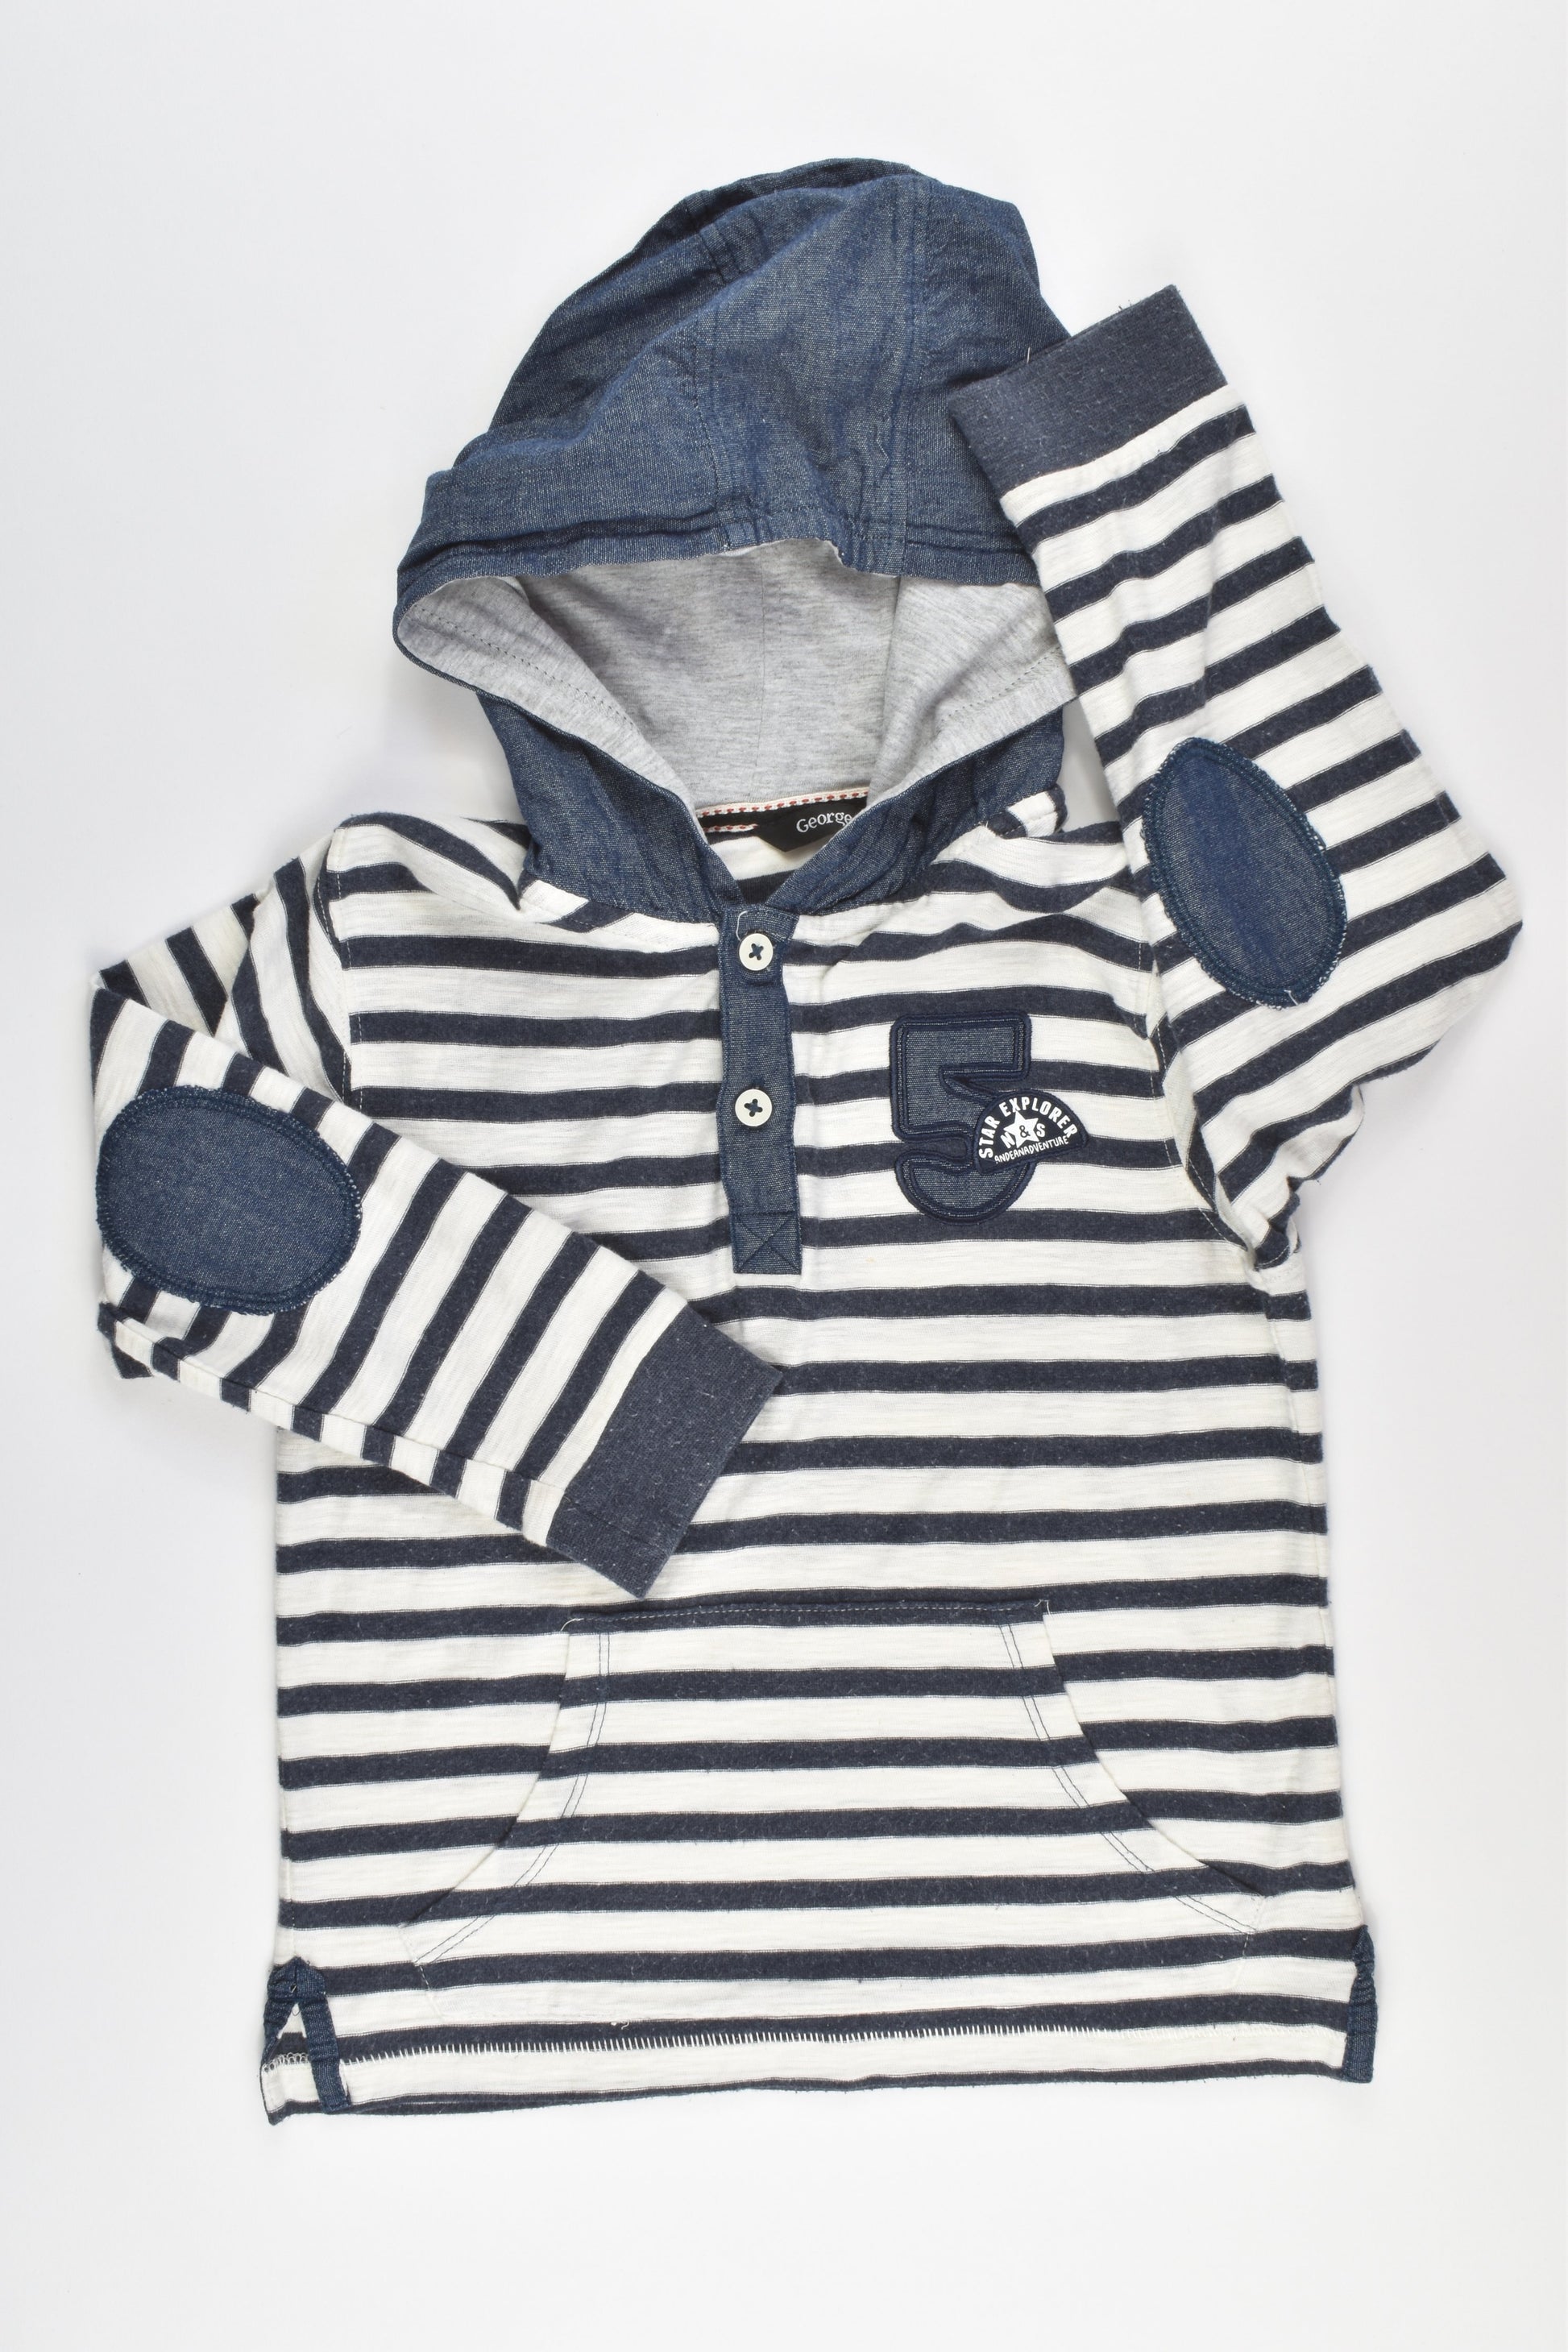 George Size 4-5 Hooded top